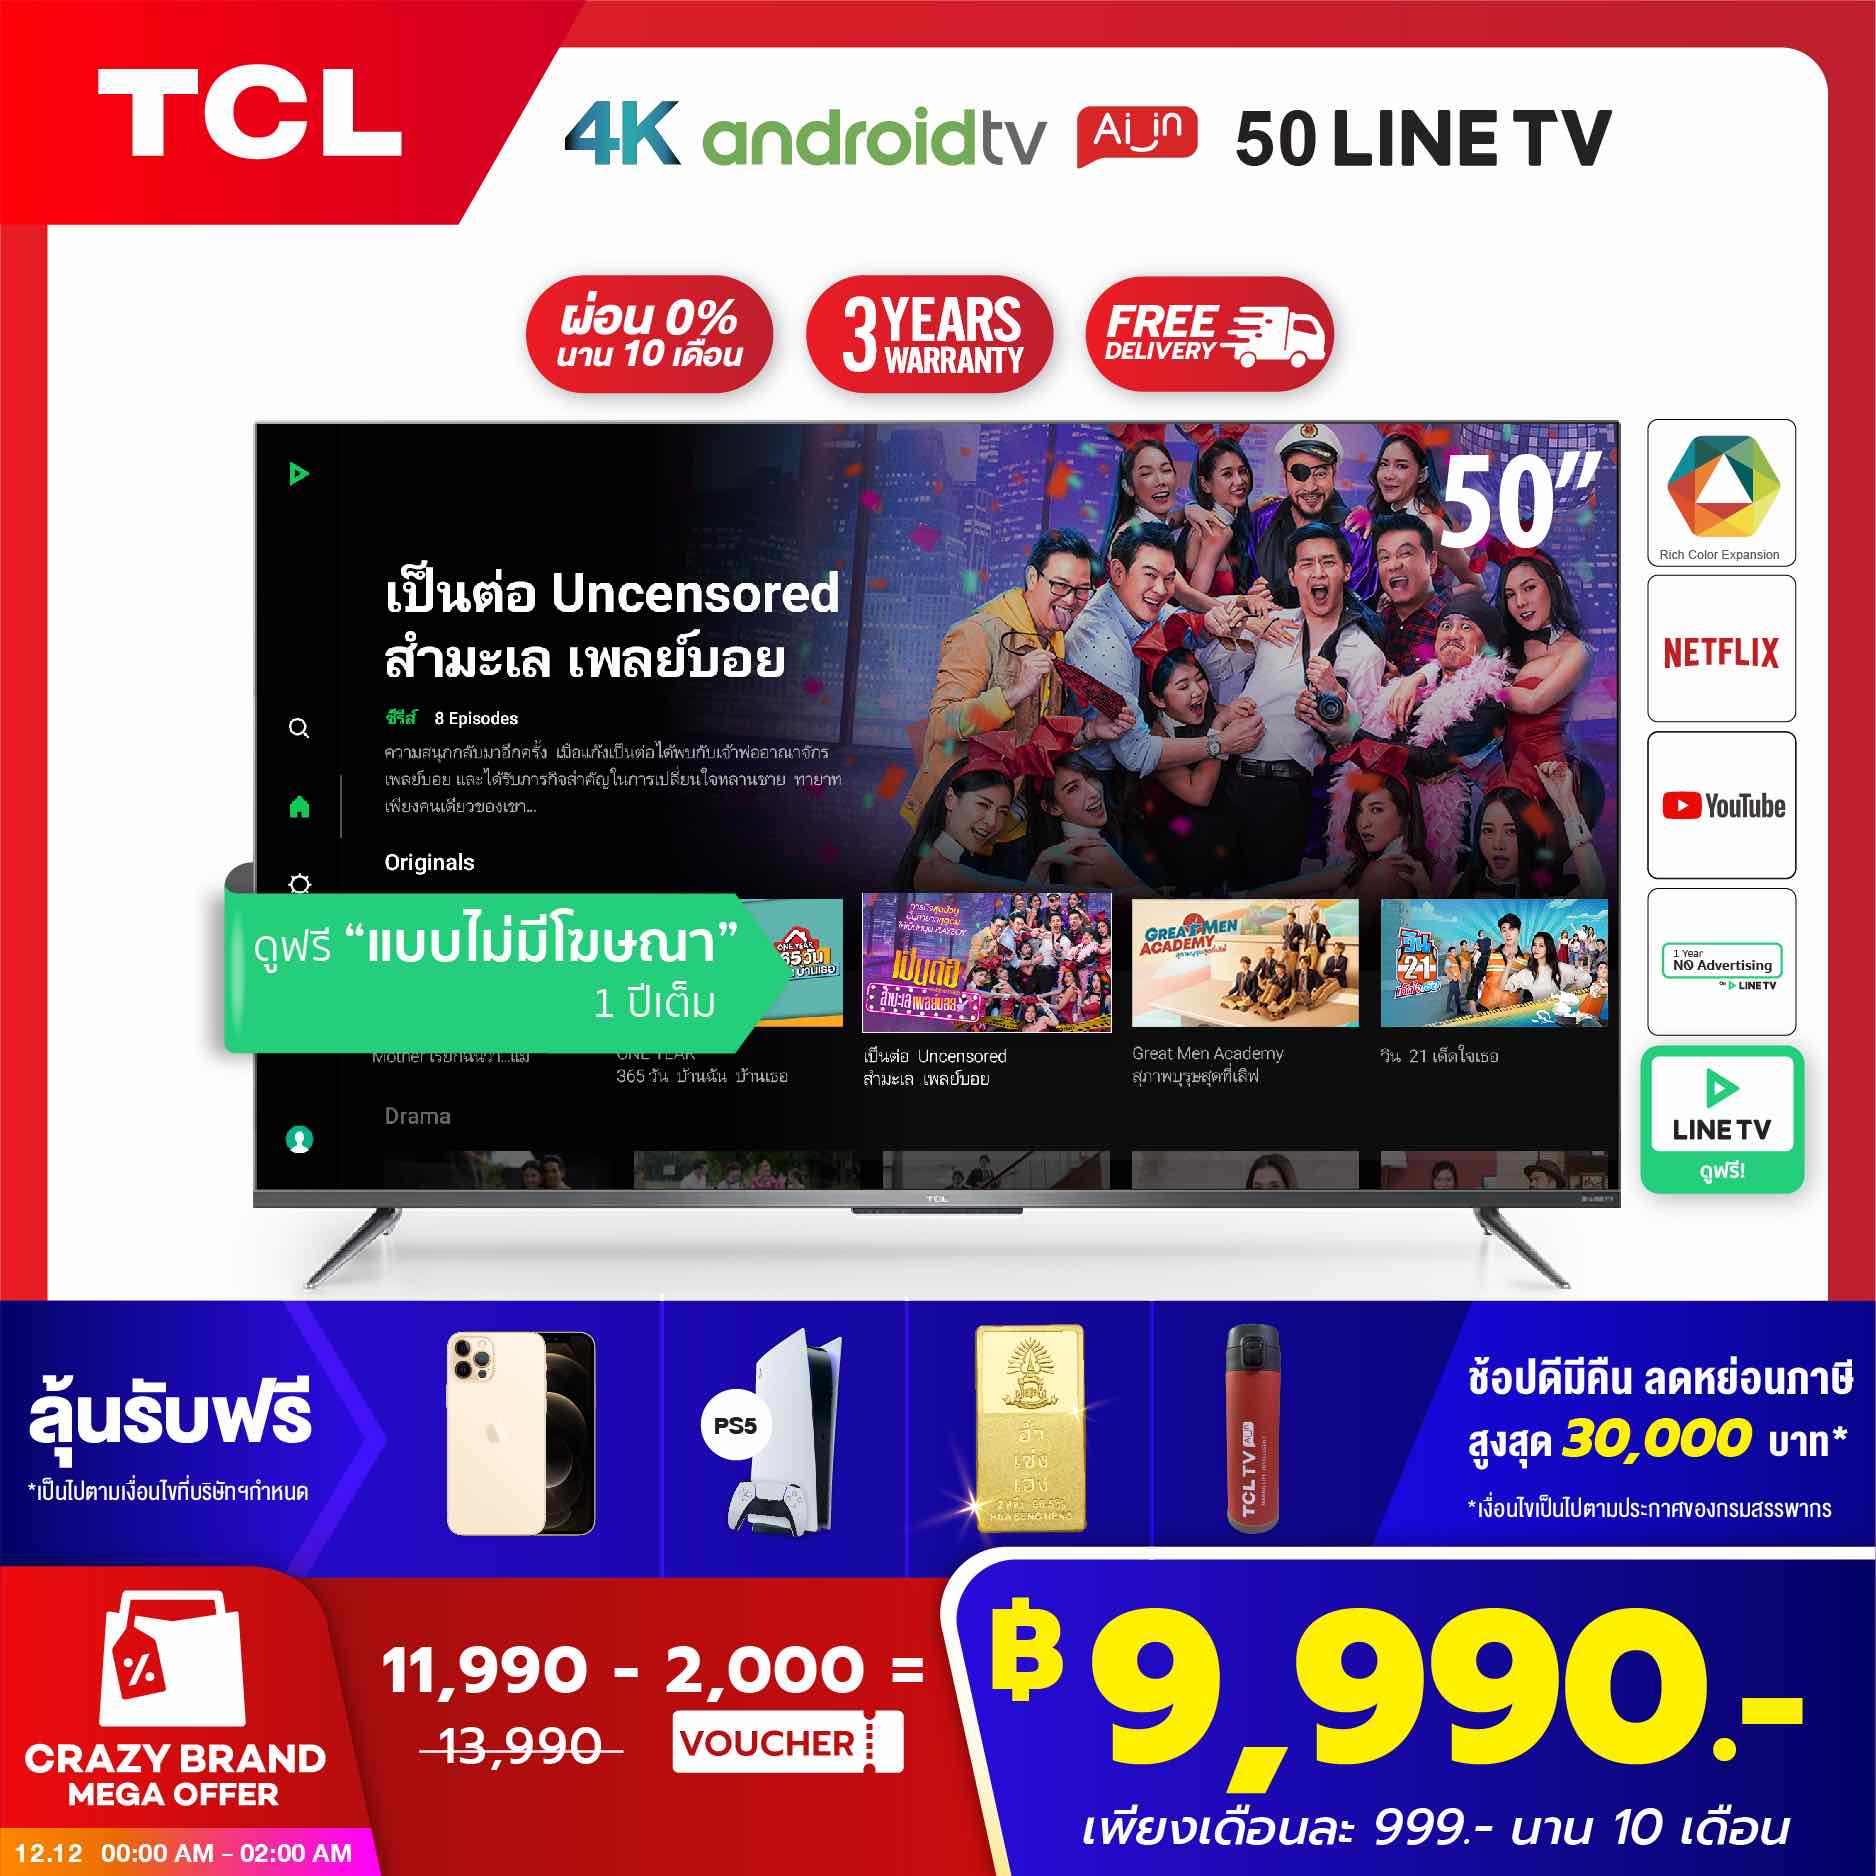 NEW! TCL ทีวี 50 นิ้ว LED 4K UHD Android TV 9.0 Wifi Smart TV OS (รุ่น
50LINETV) Google assistant & Netflix & Youtube-2G RAM+16G ROM, One
Remote with Voice search